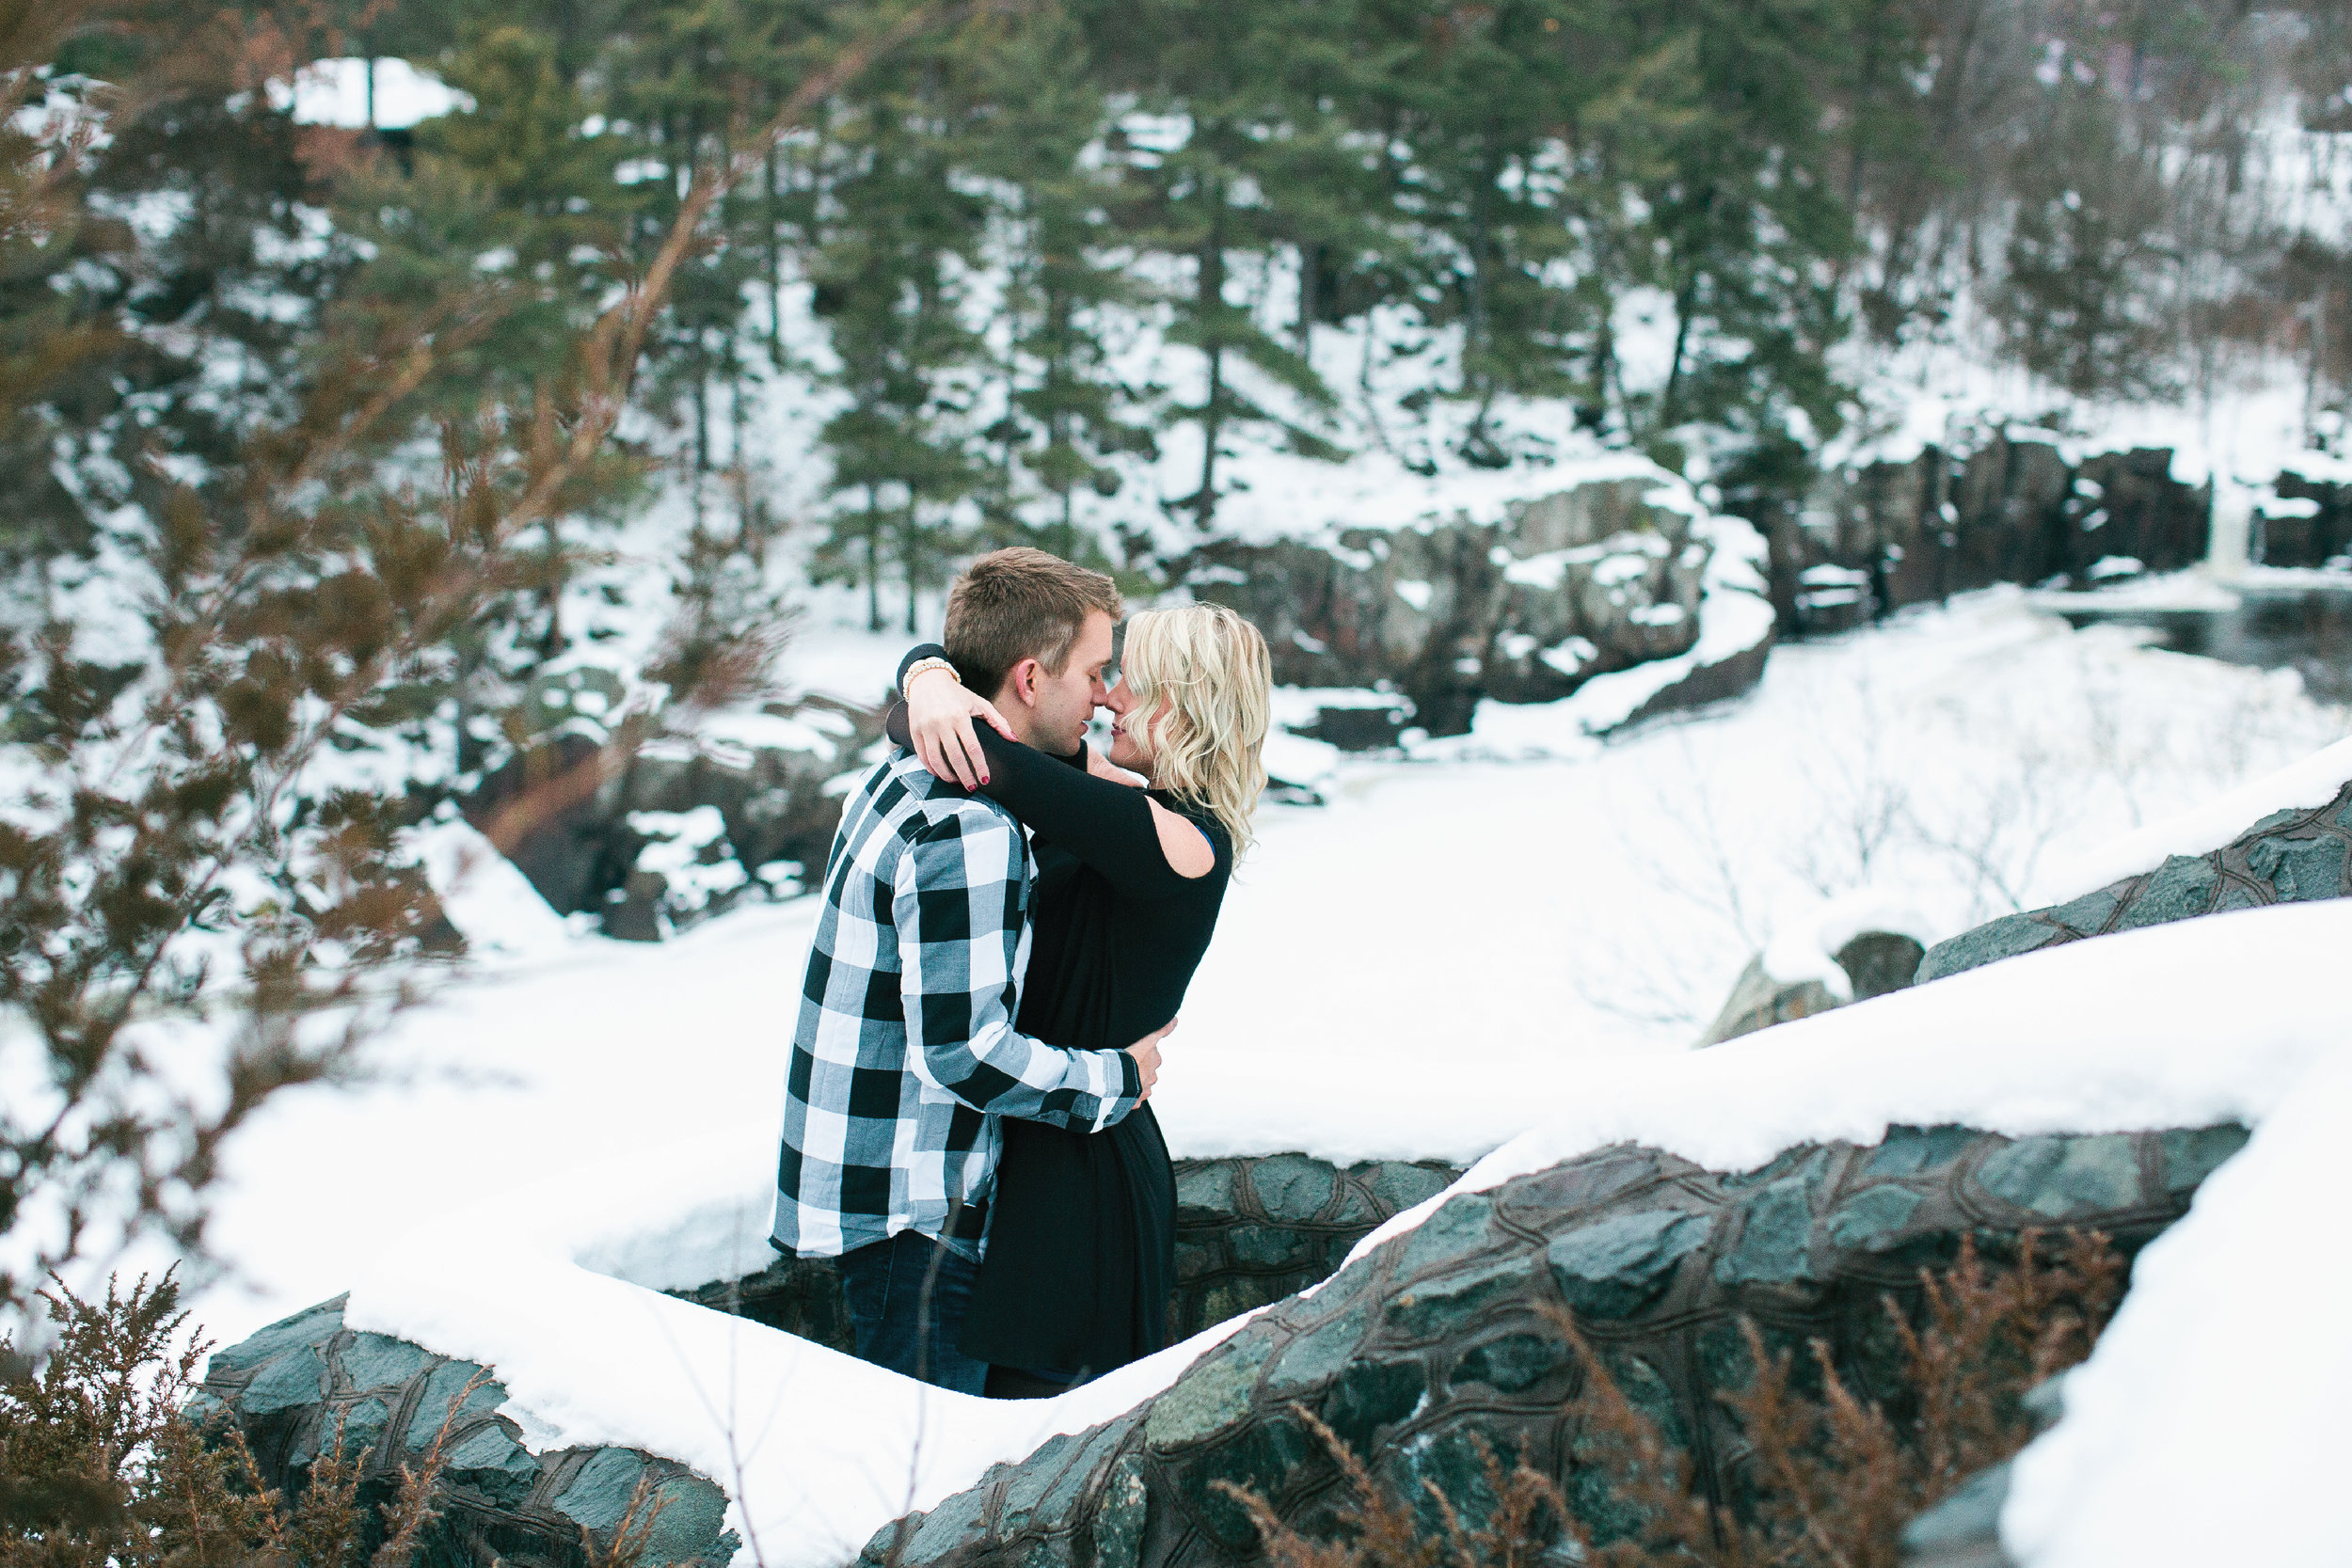 Snowy Minnesota Taylors Falls winter engagement photos on bluff overlooking river and woods